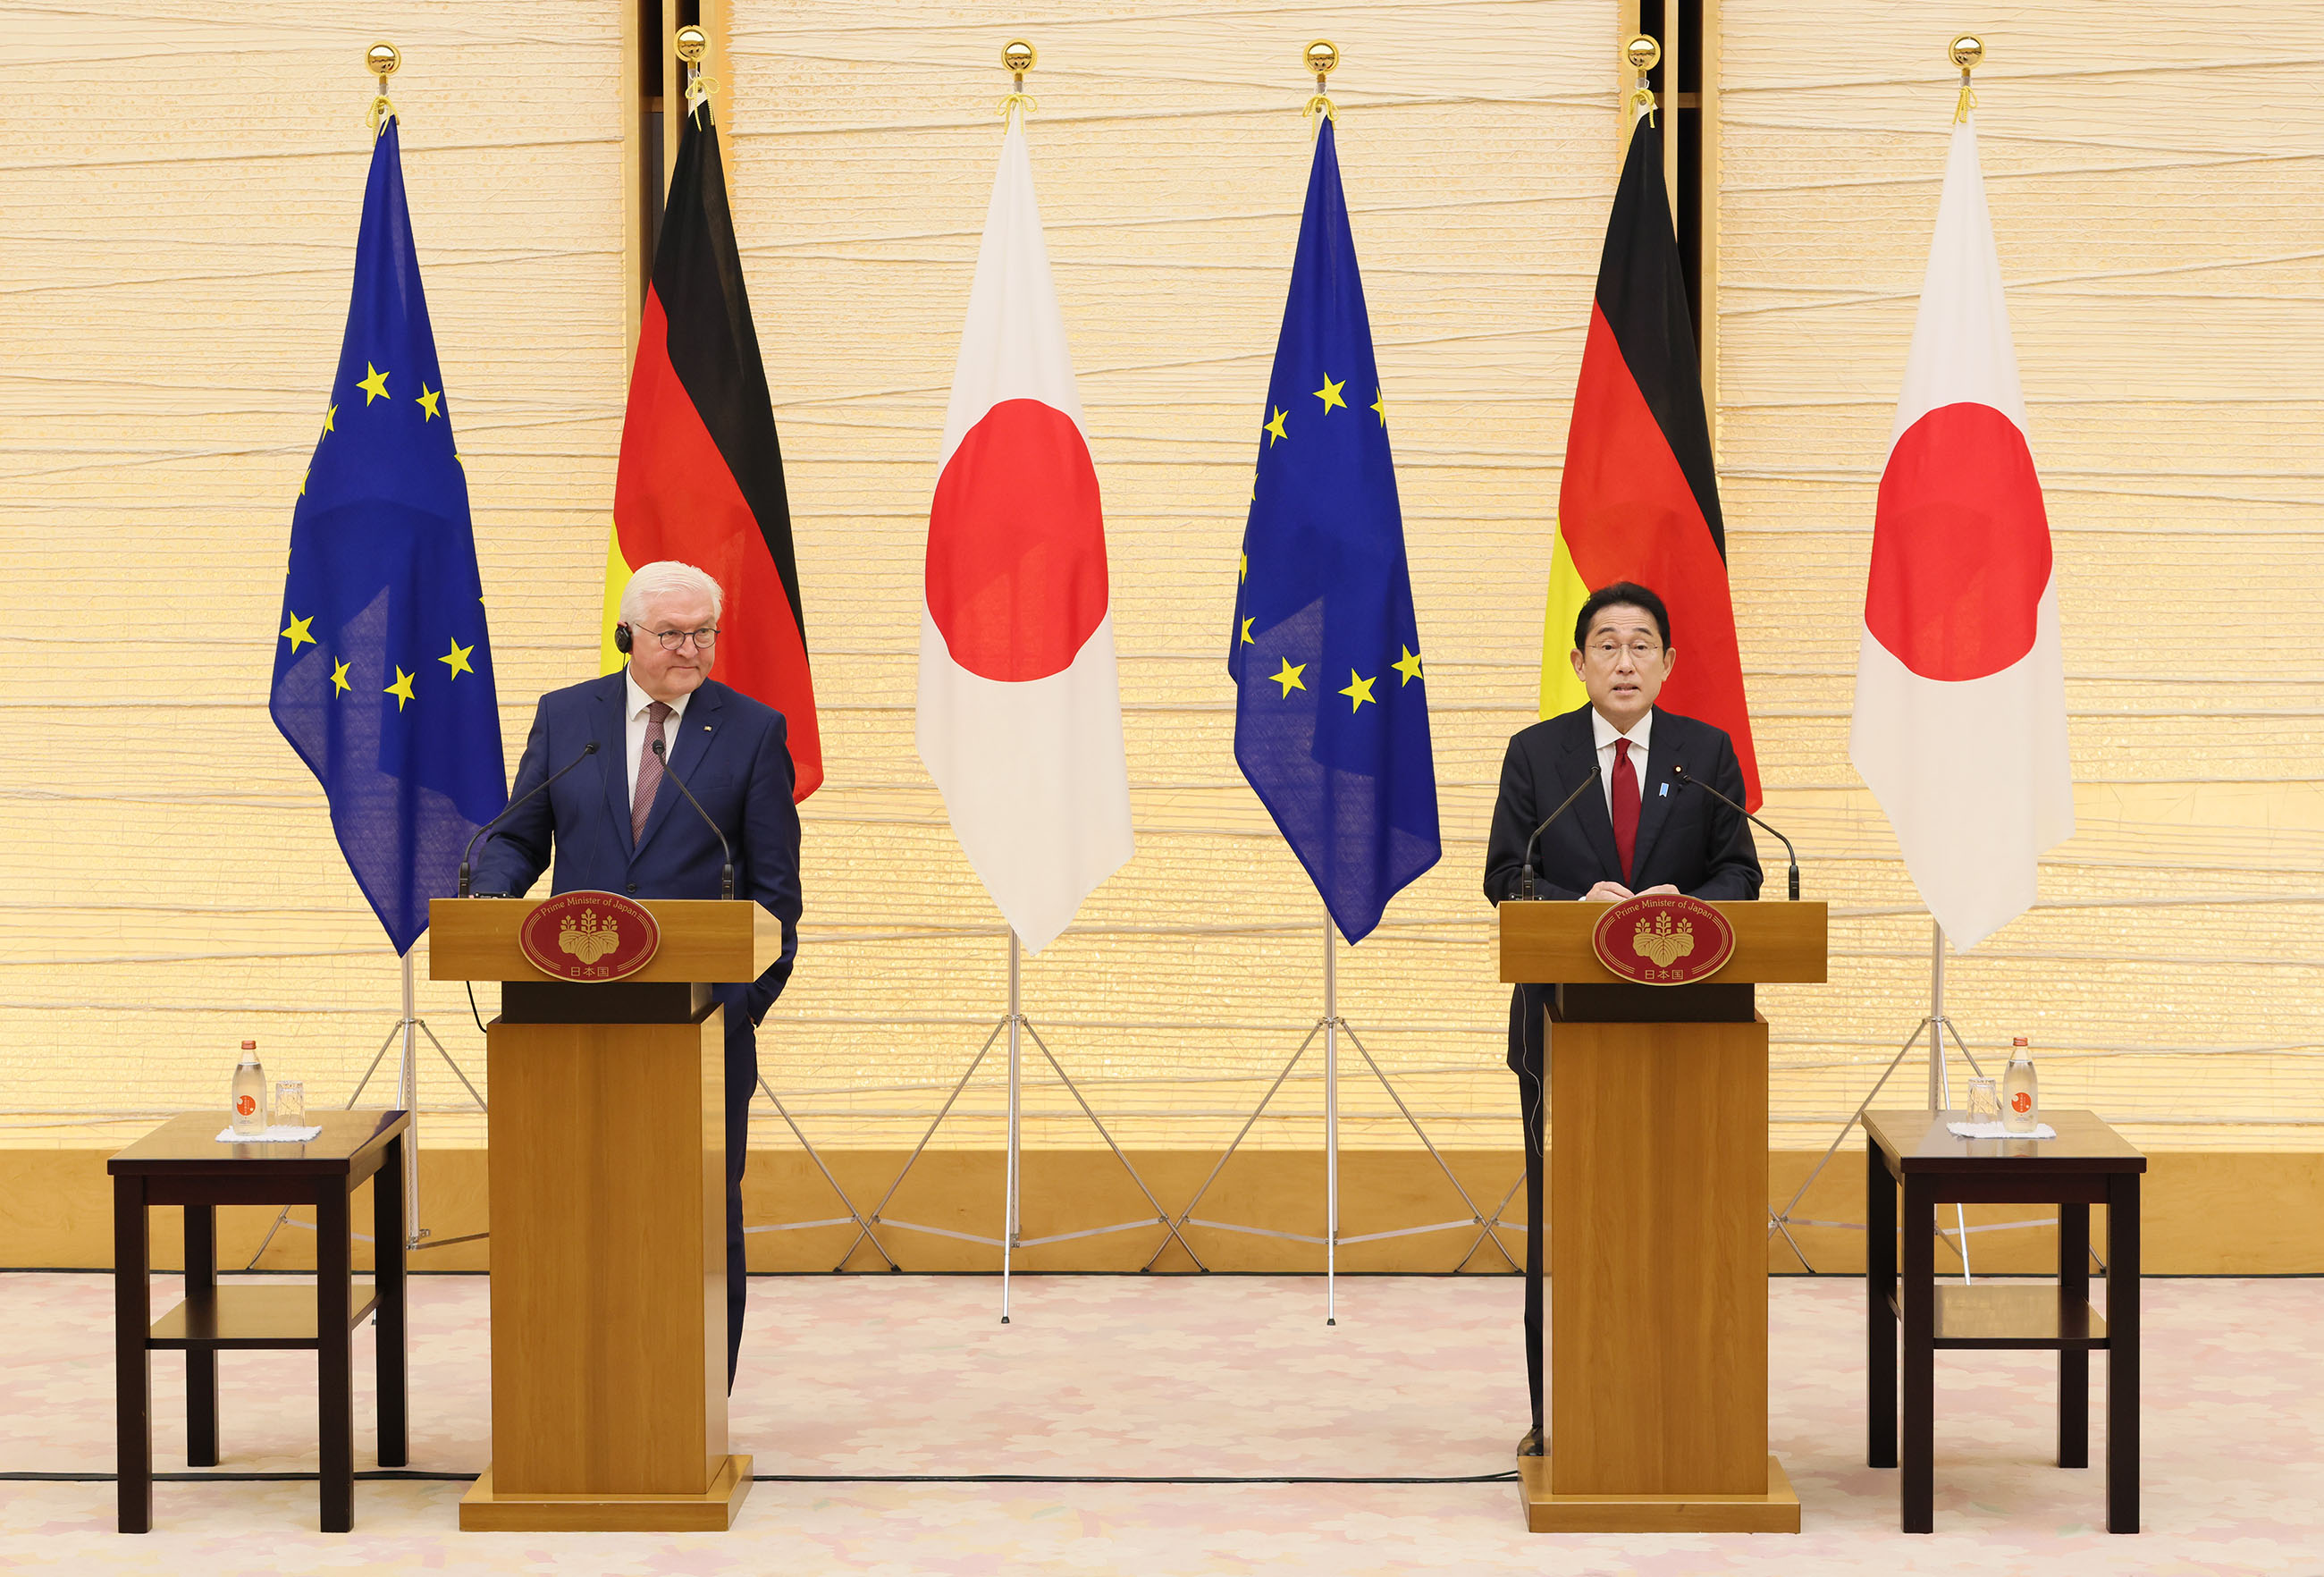 Photograph of the Japan-Germany joint press conference (1)